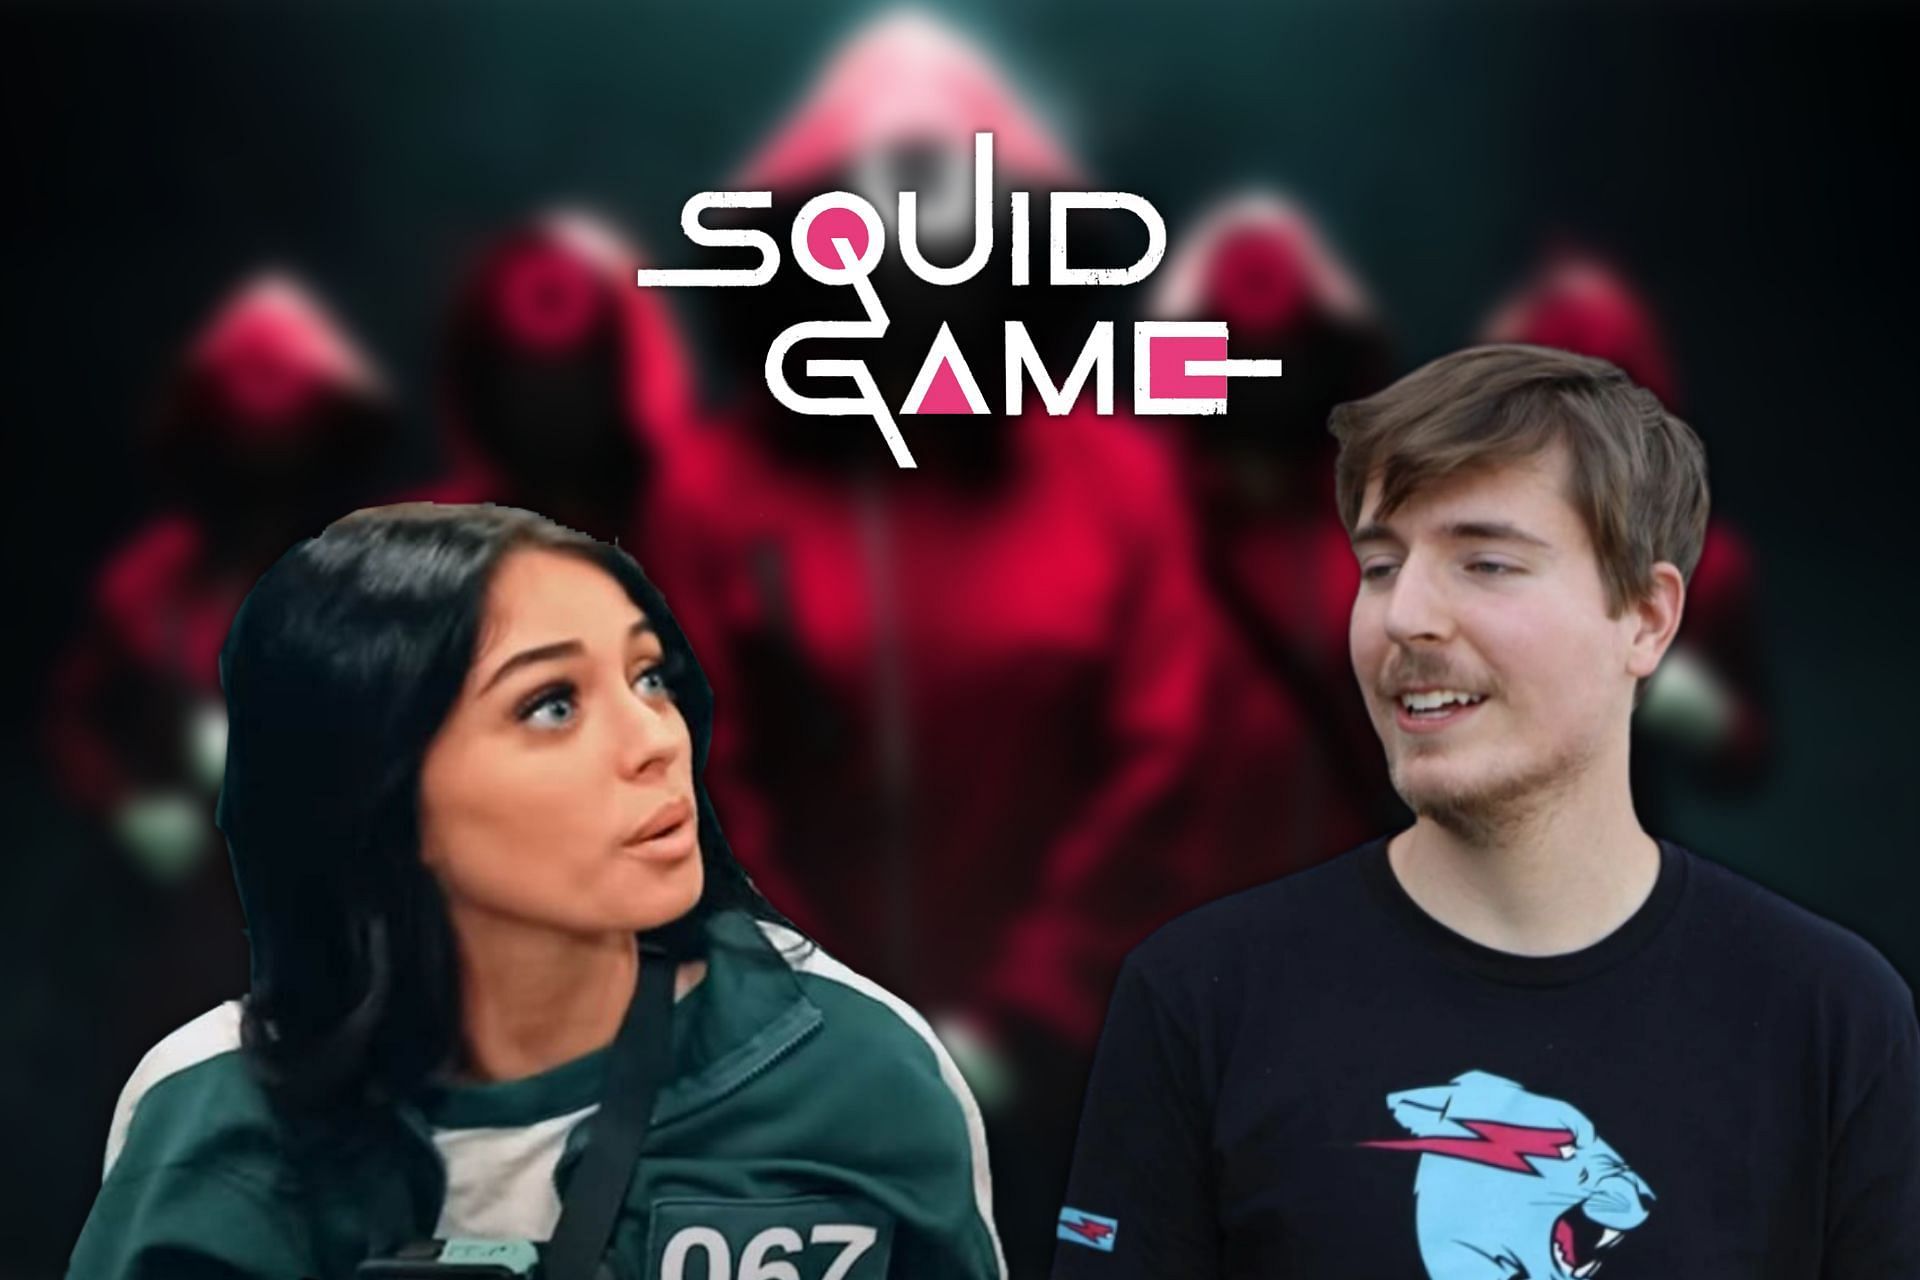 Camilla Araujo reacts to the fame she received after the success of MrBeast&#039;s &#039;Squid Game&#039; recreation (Image via Sportskeeda)